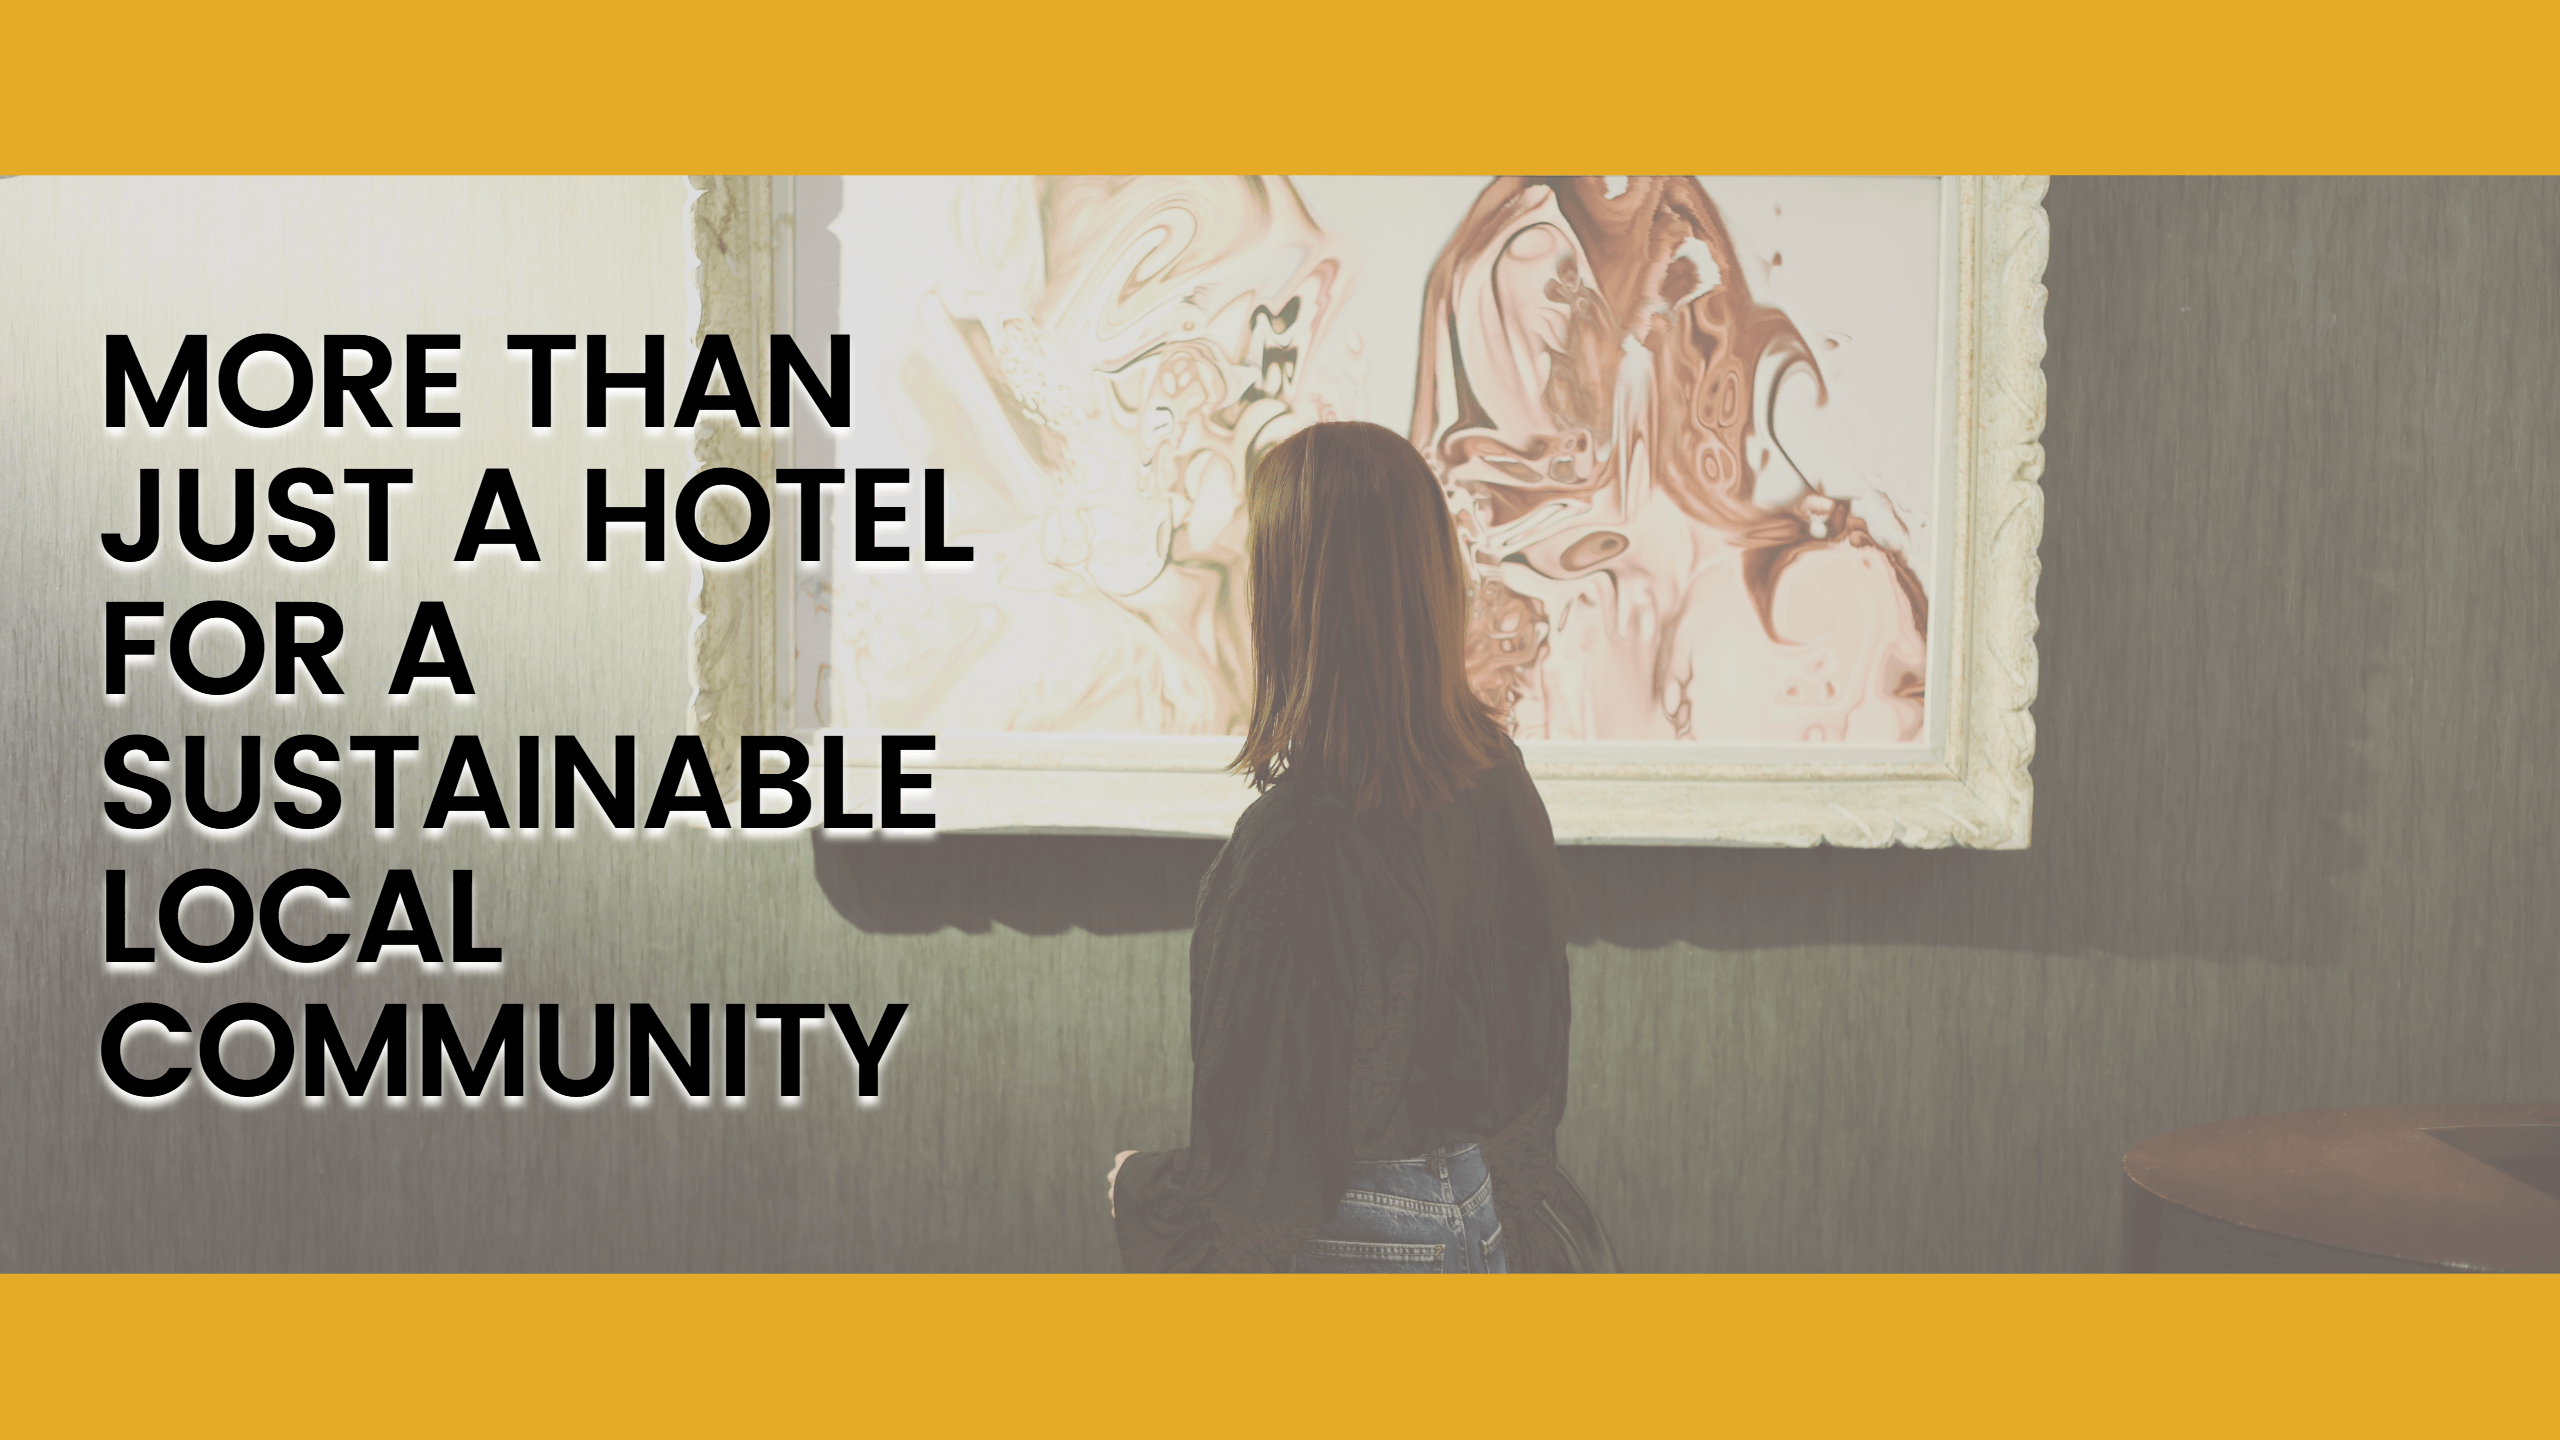 More than just a hotel for a sustainable local community